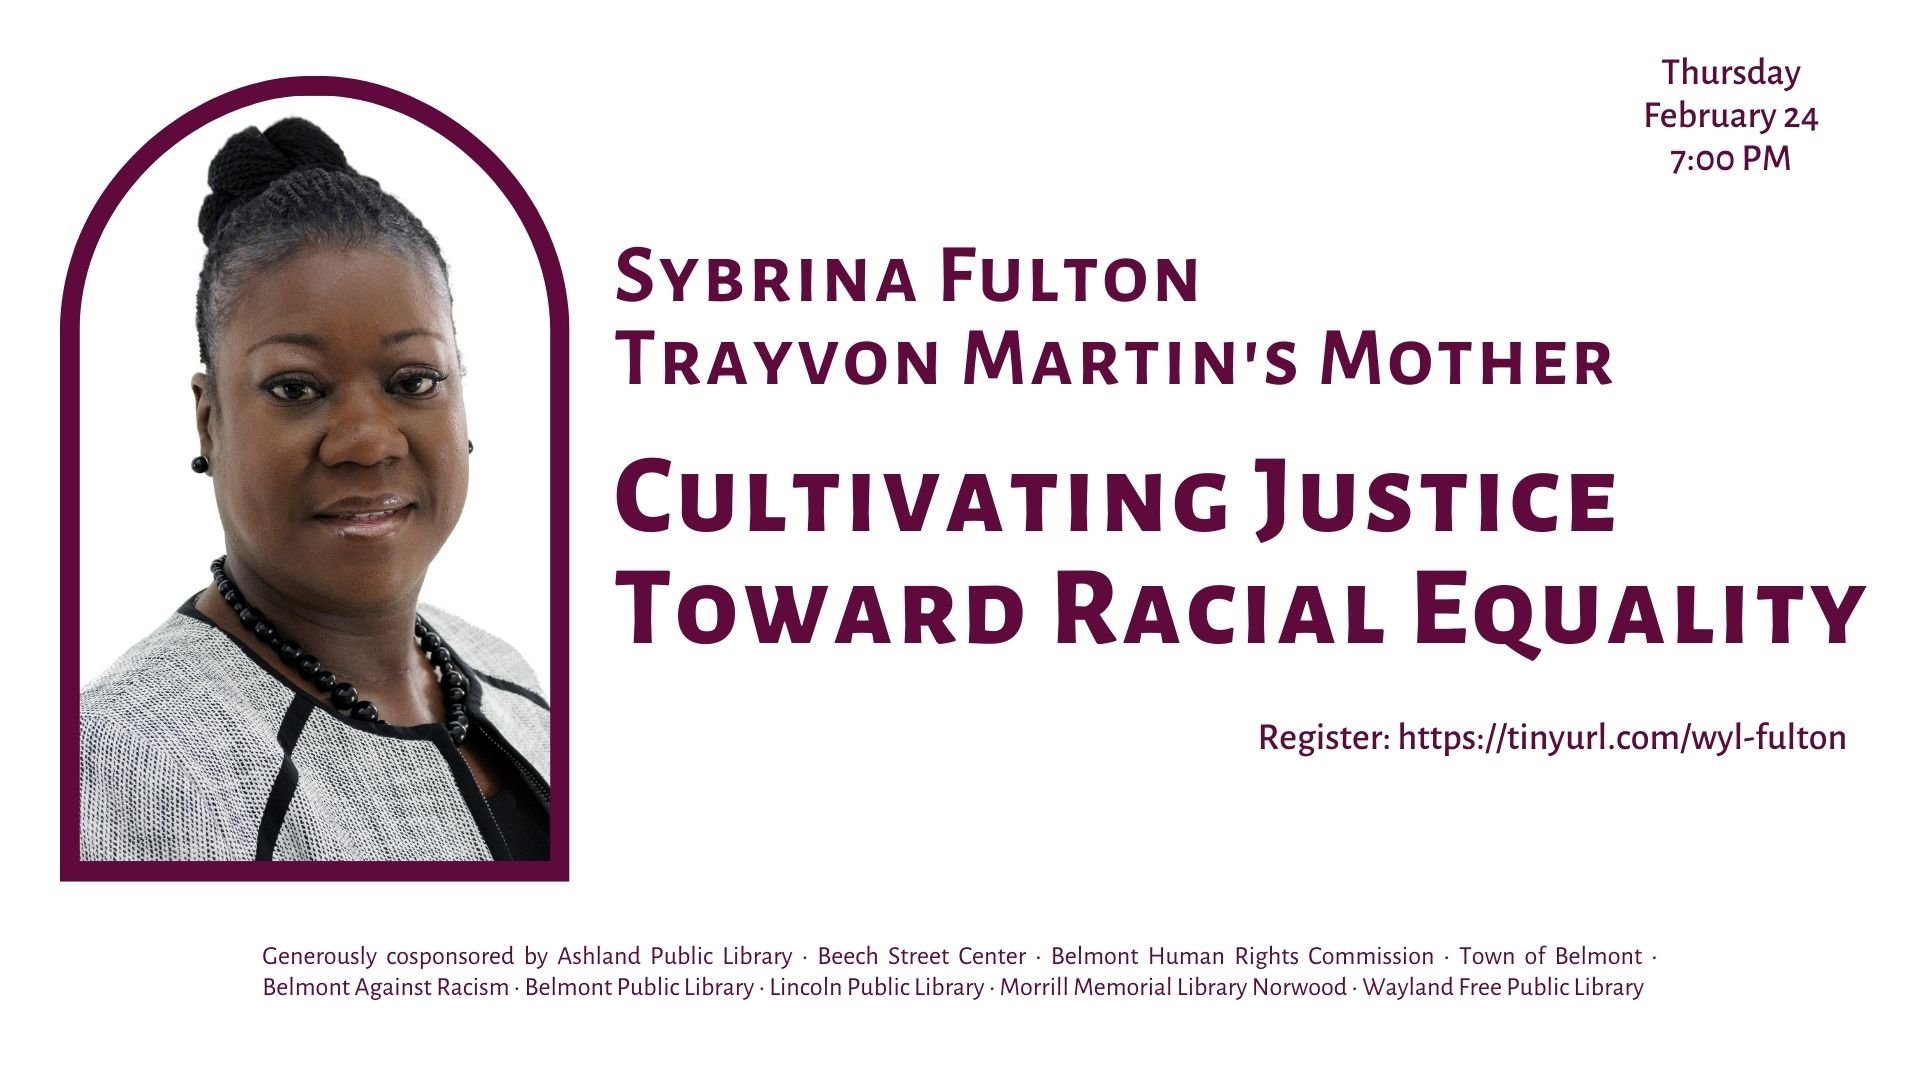 Sybrina Fulton: Cultivating Justice toward Racial Equality